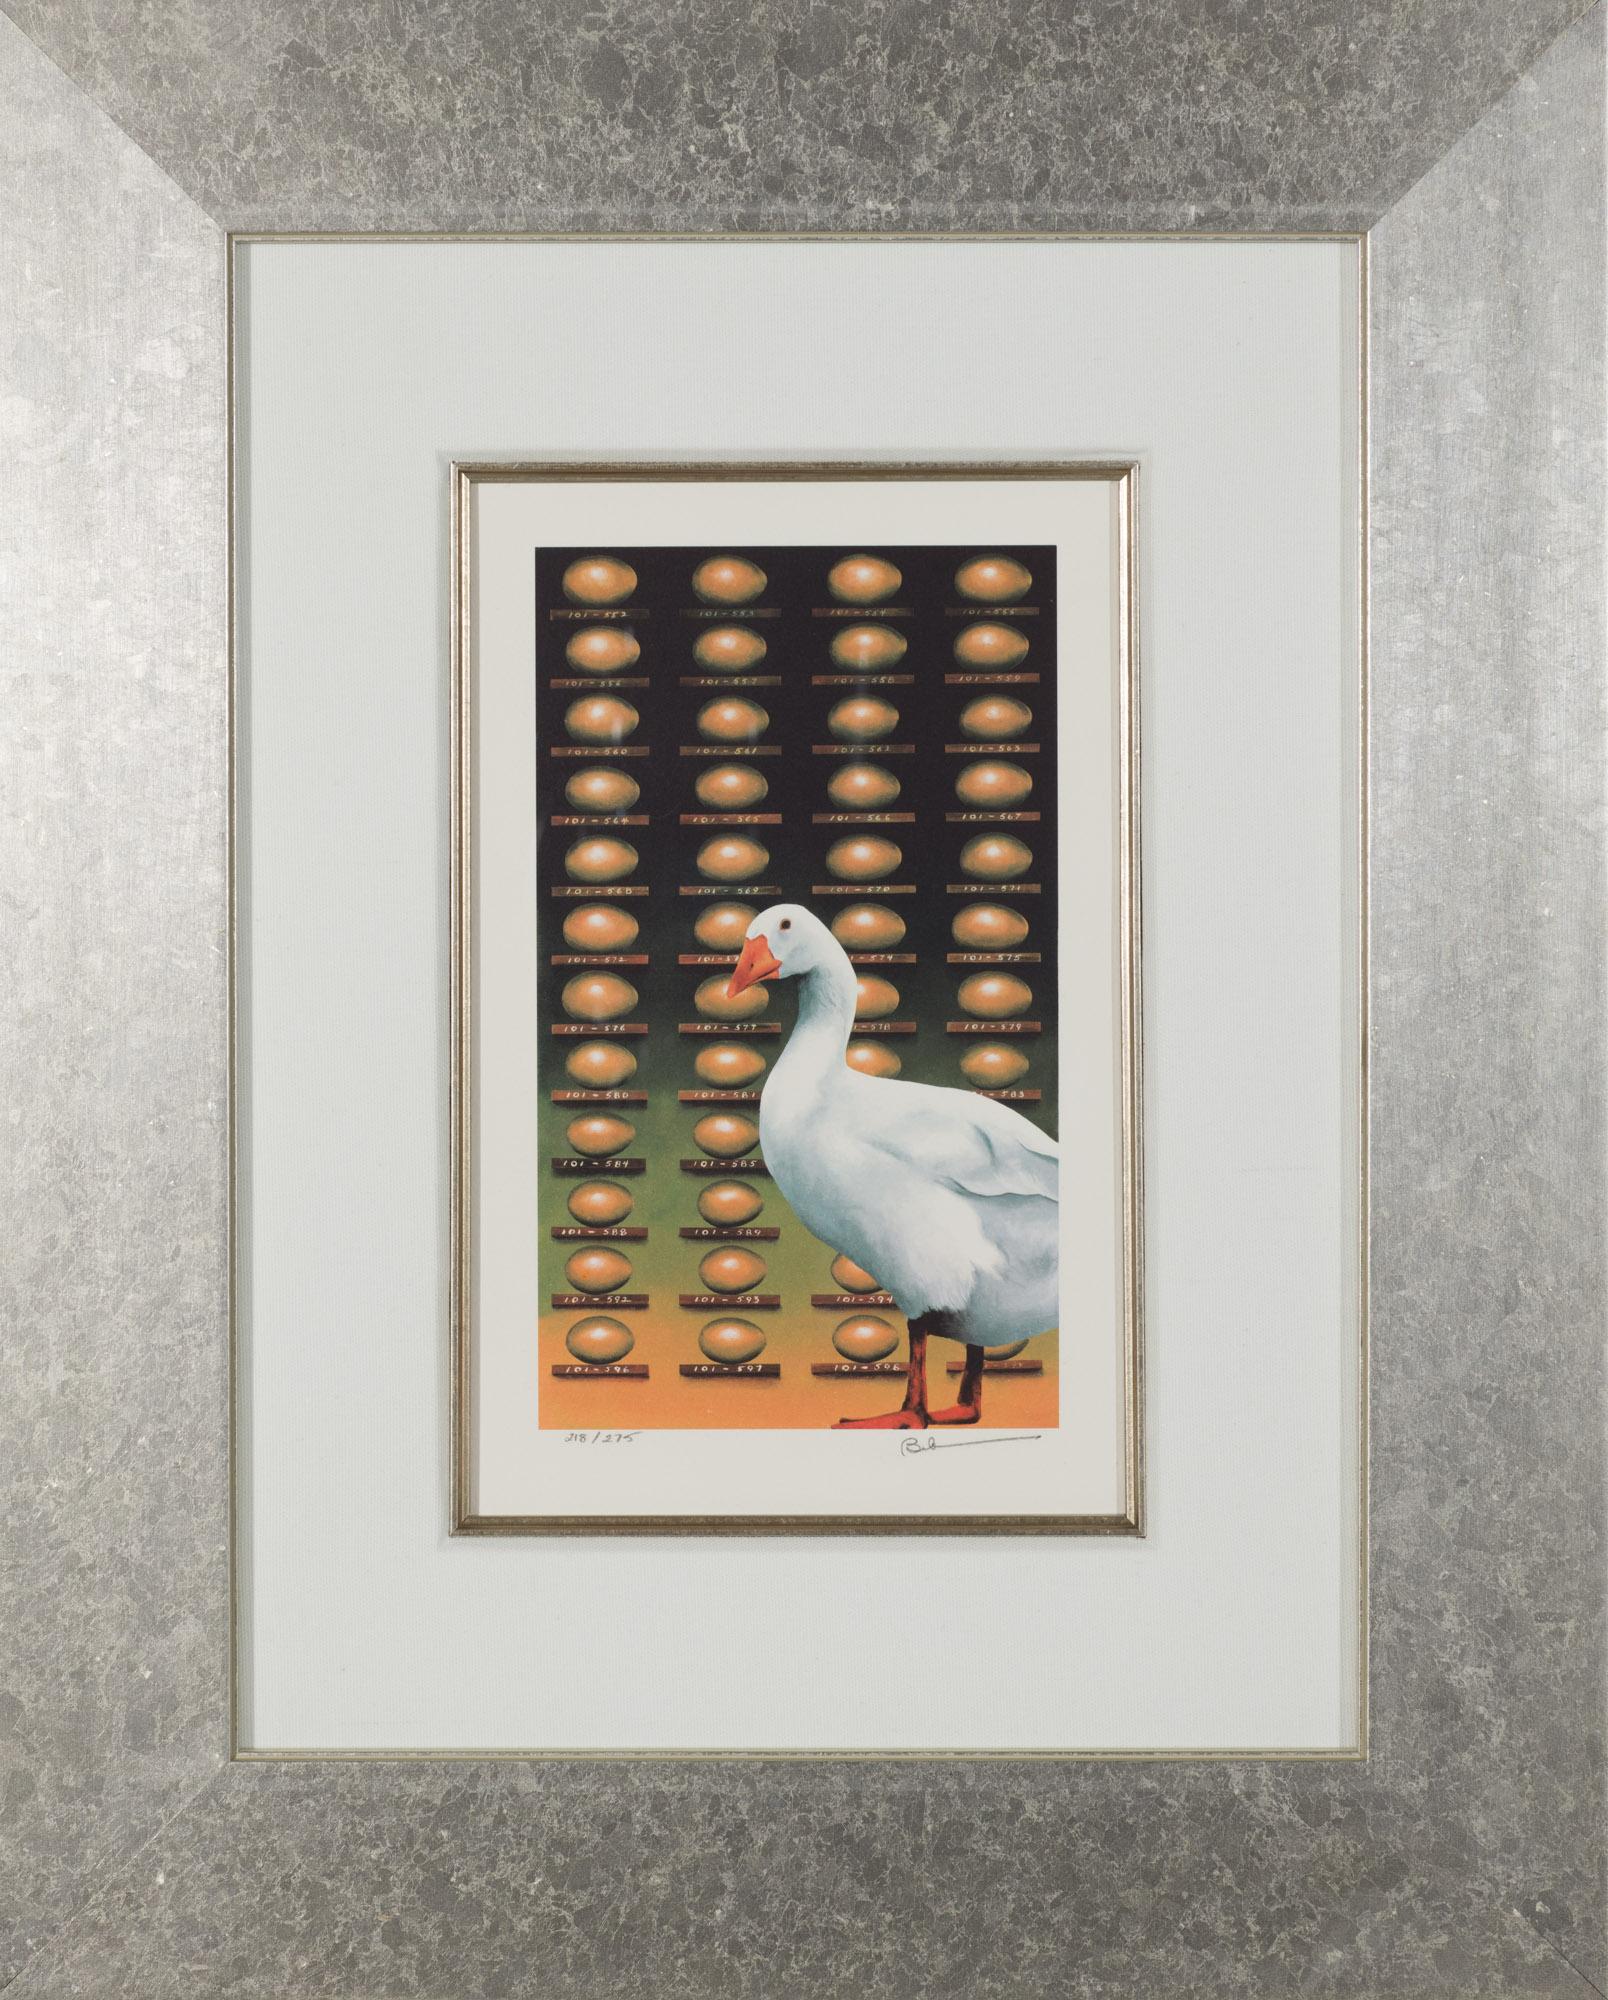 The Golden Goose is a lithograph on paper, 9.75 x 5.5 inches image size, and initialed 'BD' lower right. From the edition of 395, numbered 218/275 (there were also 100 Roman and 20 AP). Framed in a contemporary, silver-tone frame.

Robert Deyber’s